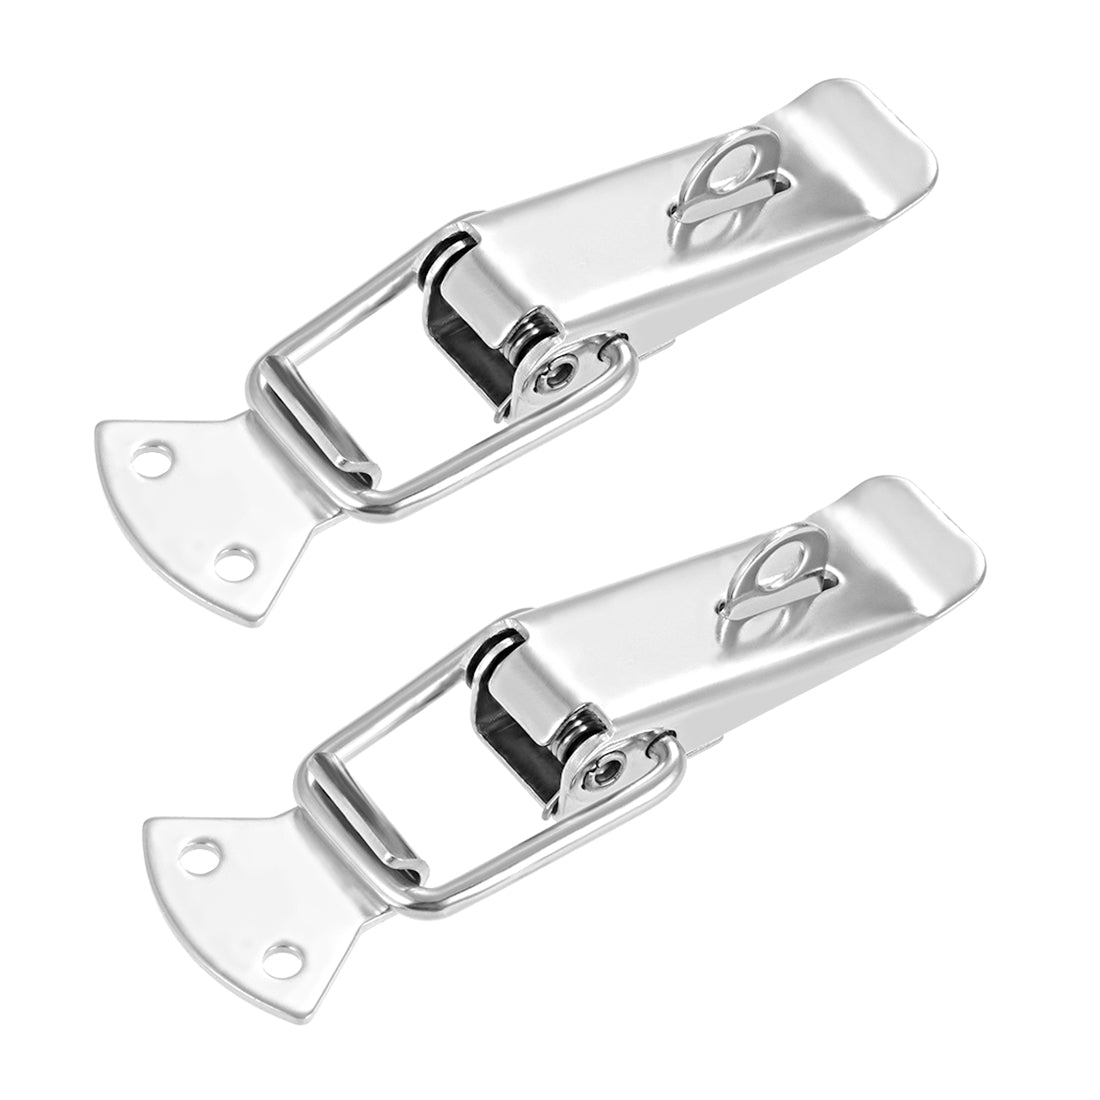 uxcell Uxcell 201 Stainless Steel Spring Loaded Toggle Case Box Chest Trunk Latch Catches Hasps Clamp 2 pcs, 127mm Overall Length